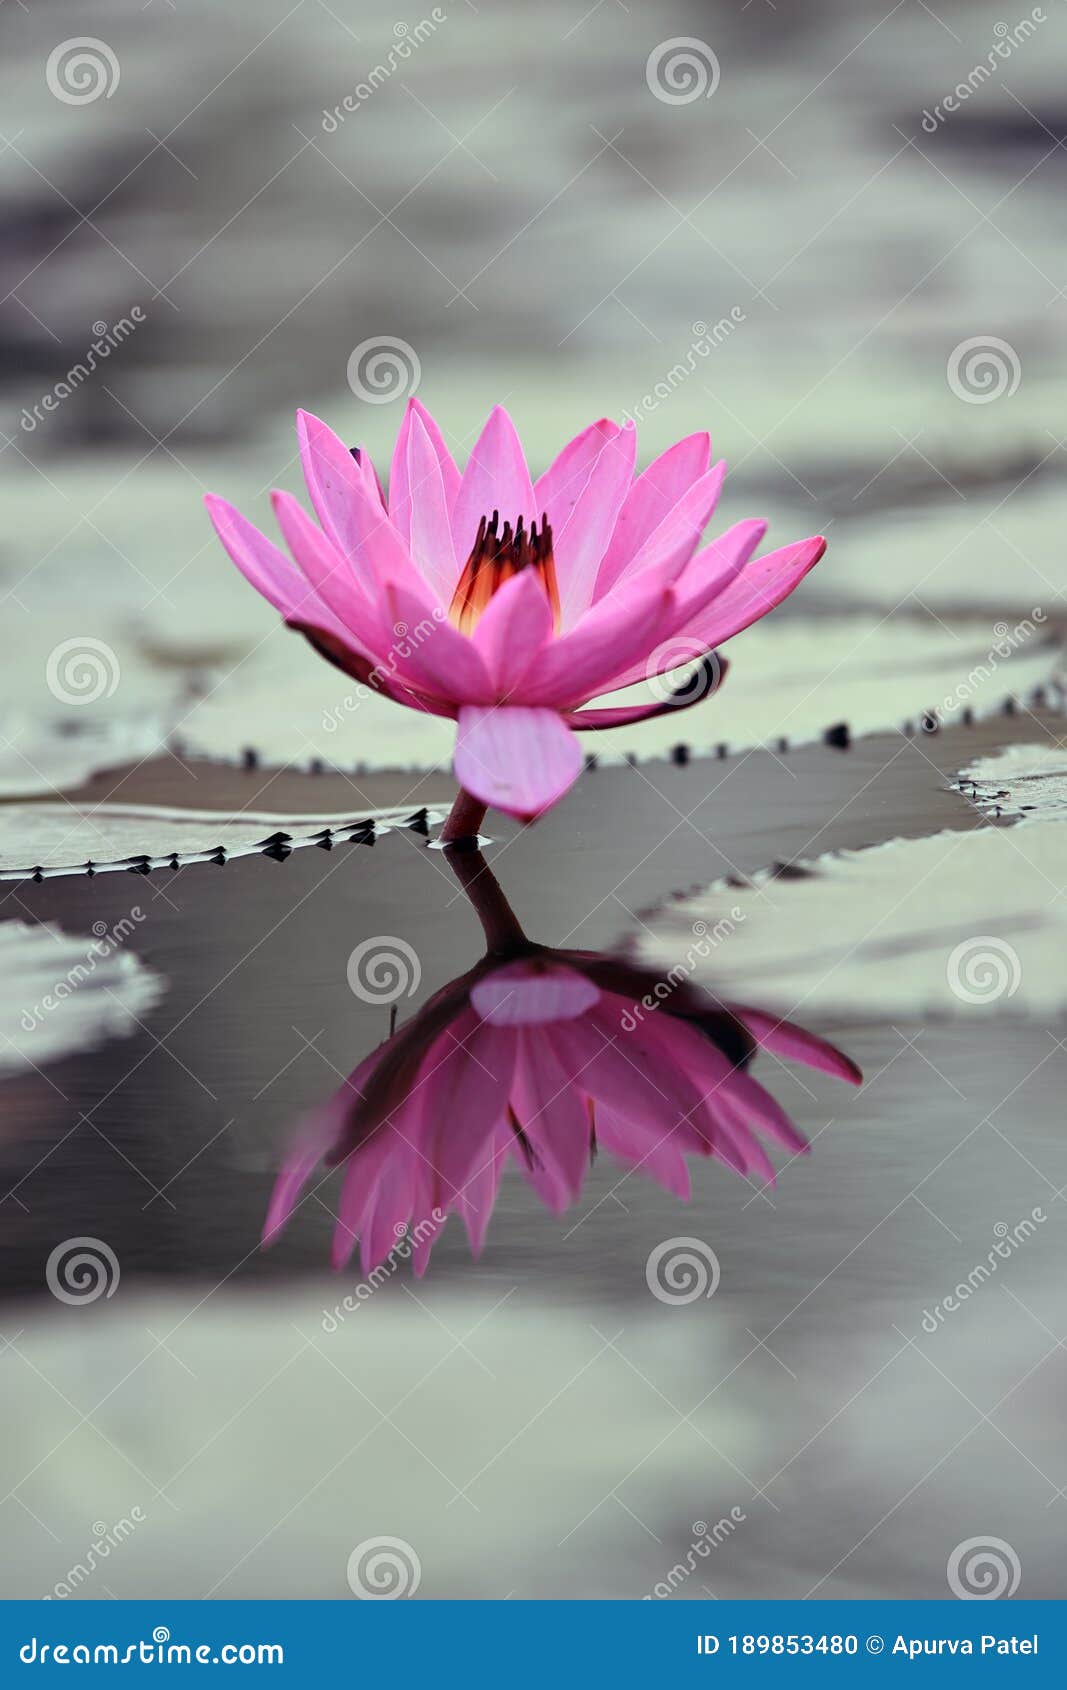 Pink Lotus Flower with Reflection in Pond Best HD Wallpaper Stock ...